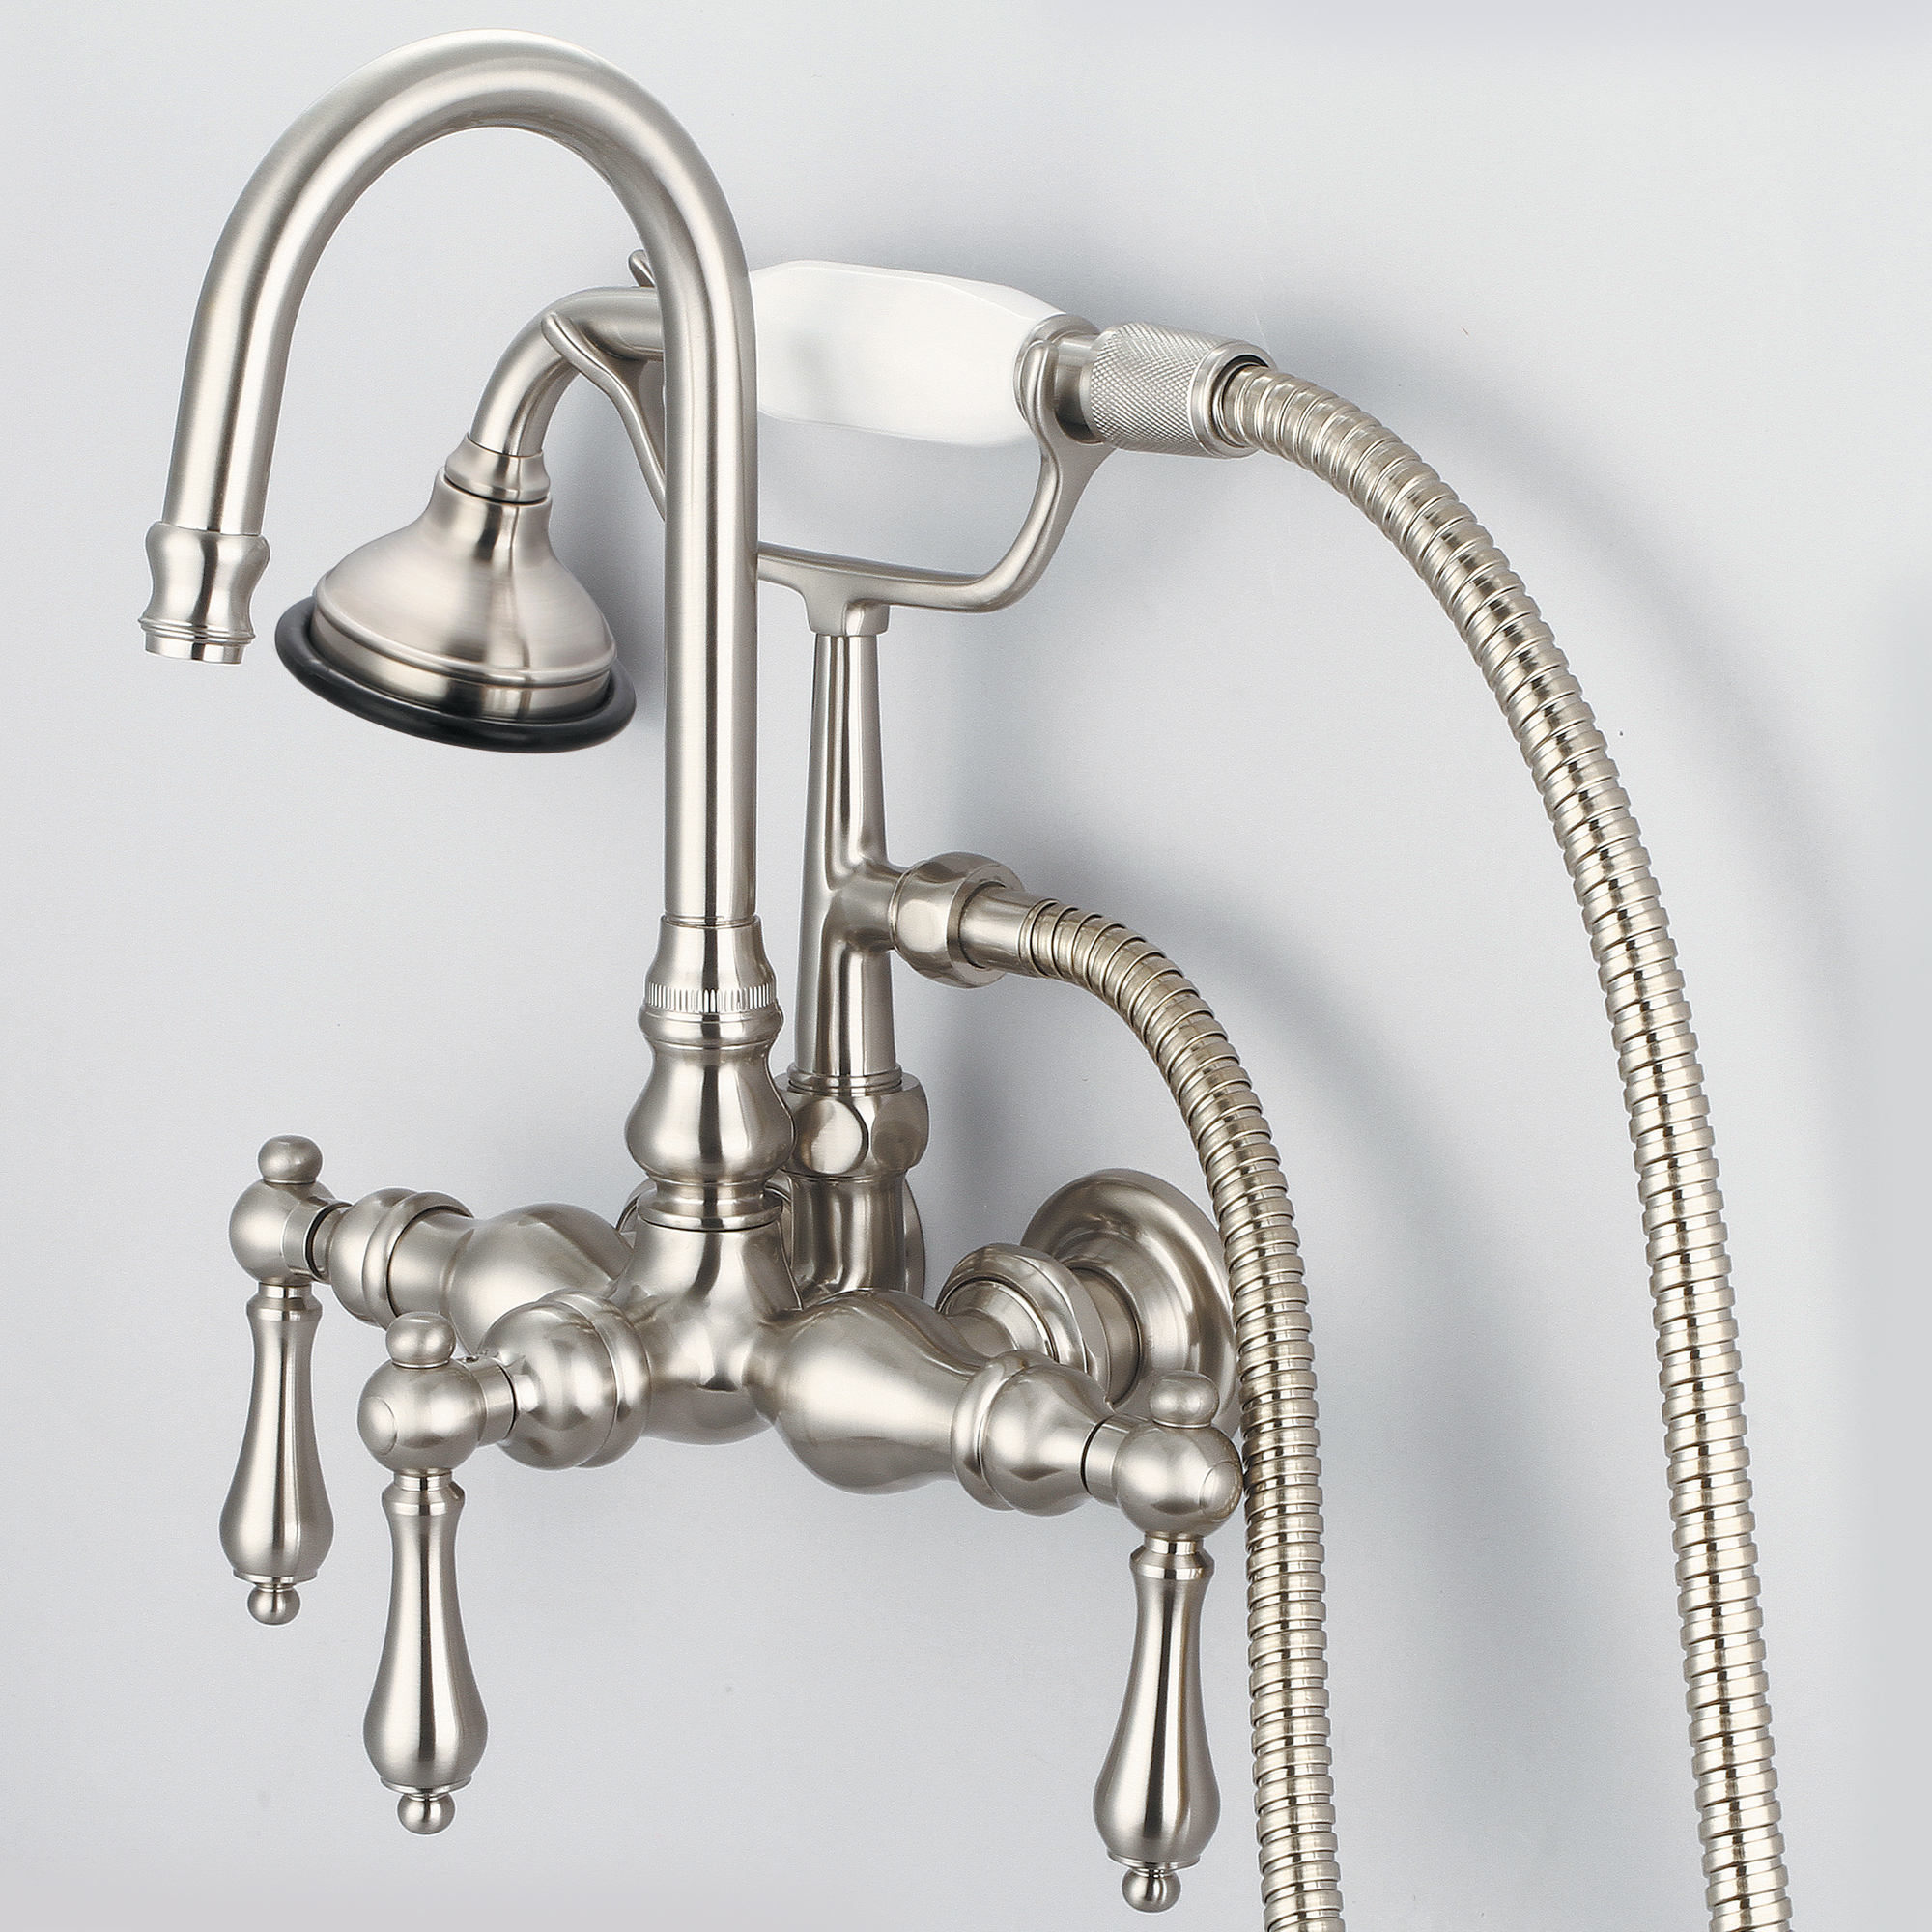 Vintage Classic 3.375 Inch Center Wall Mount Tub Faucet With Gooseneck Spout, Straight Wall Connector & Handheld Shower in Brushed Nickel Finish With Metal Lever Handles Without Labels